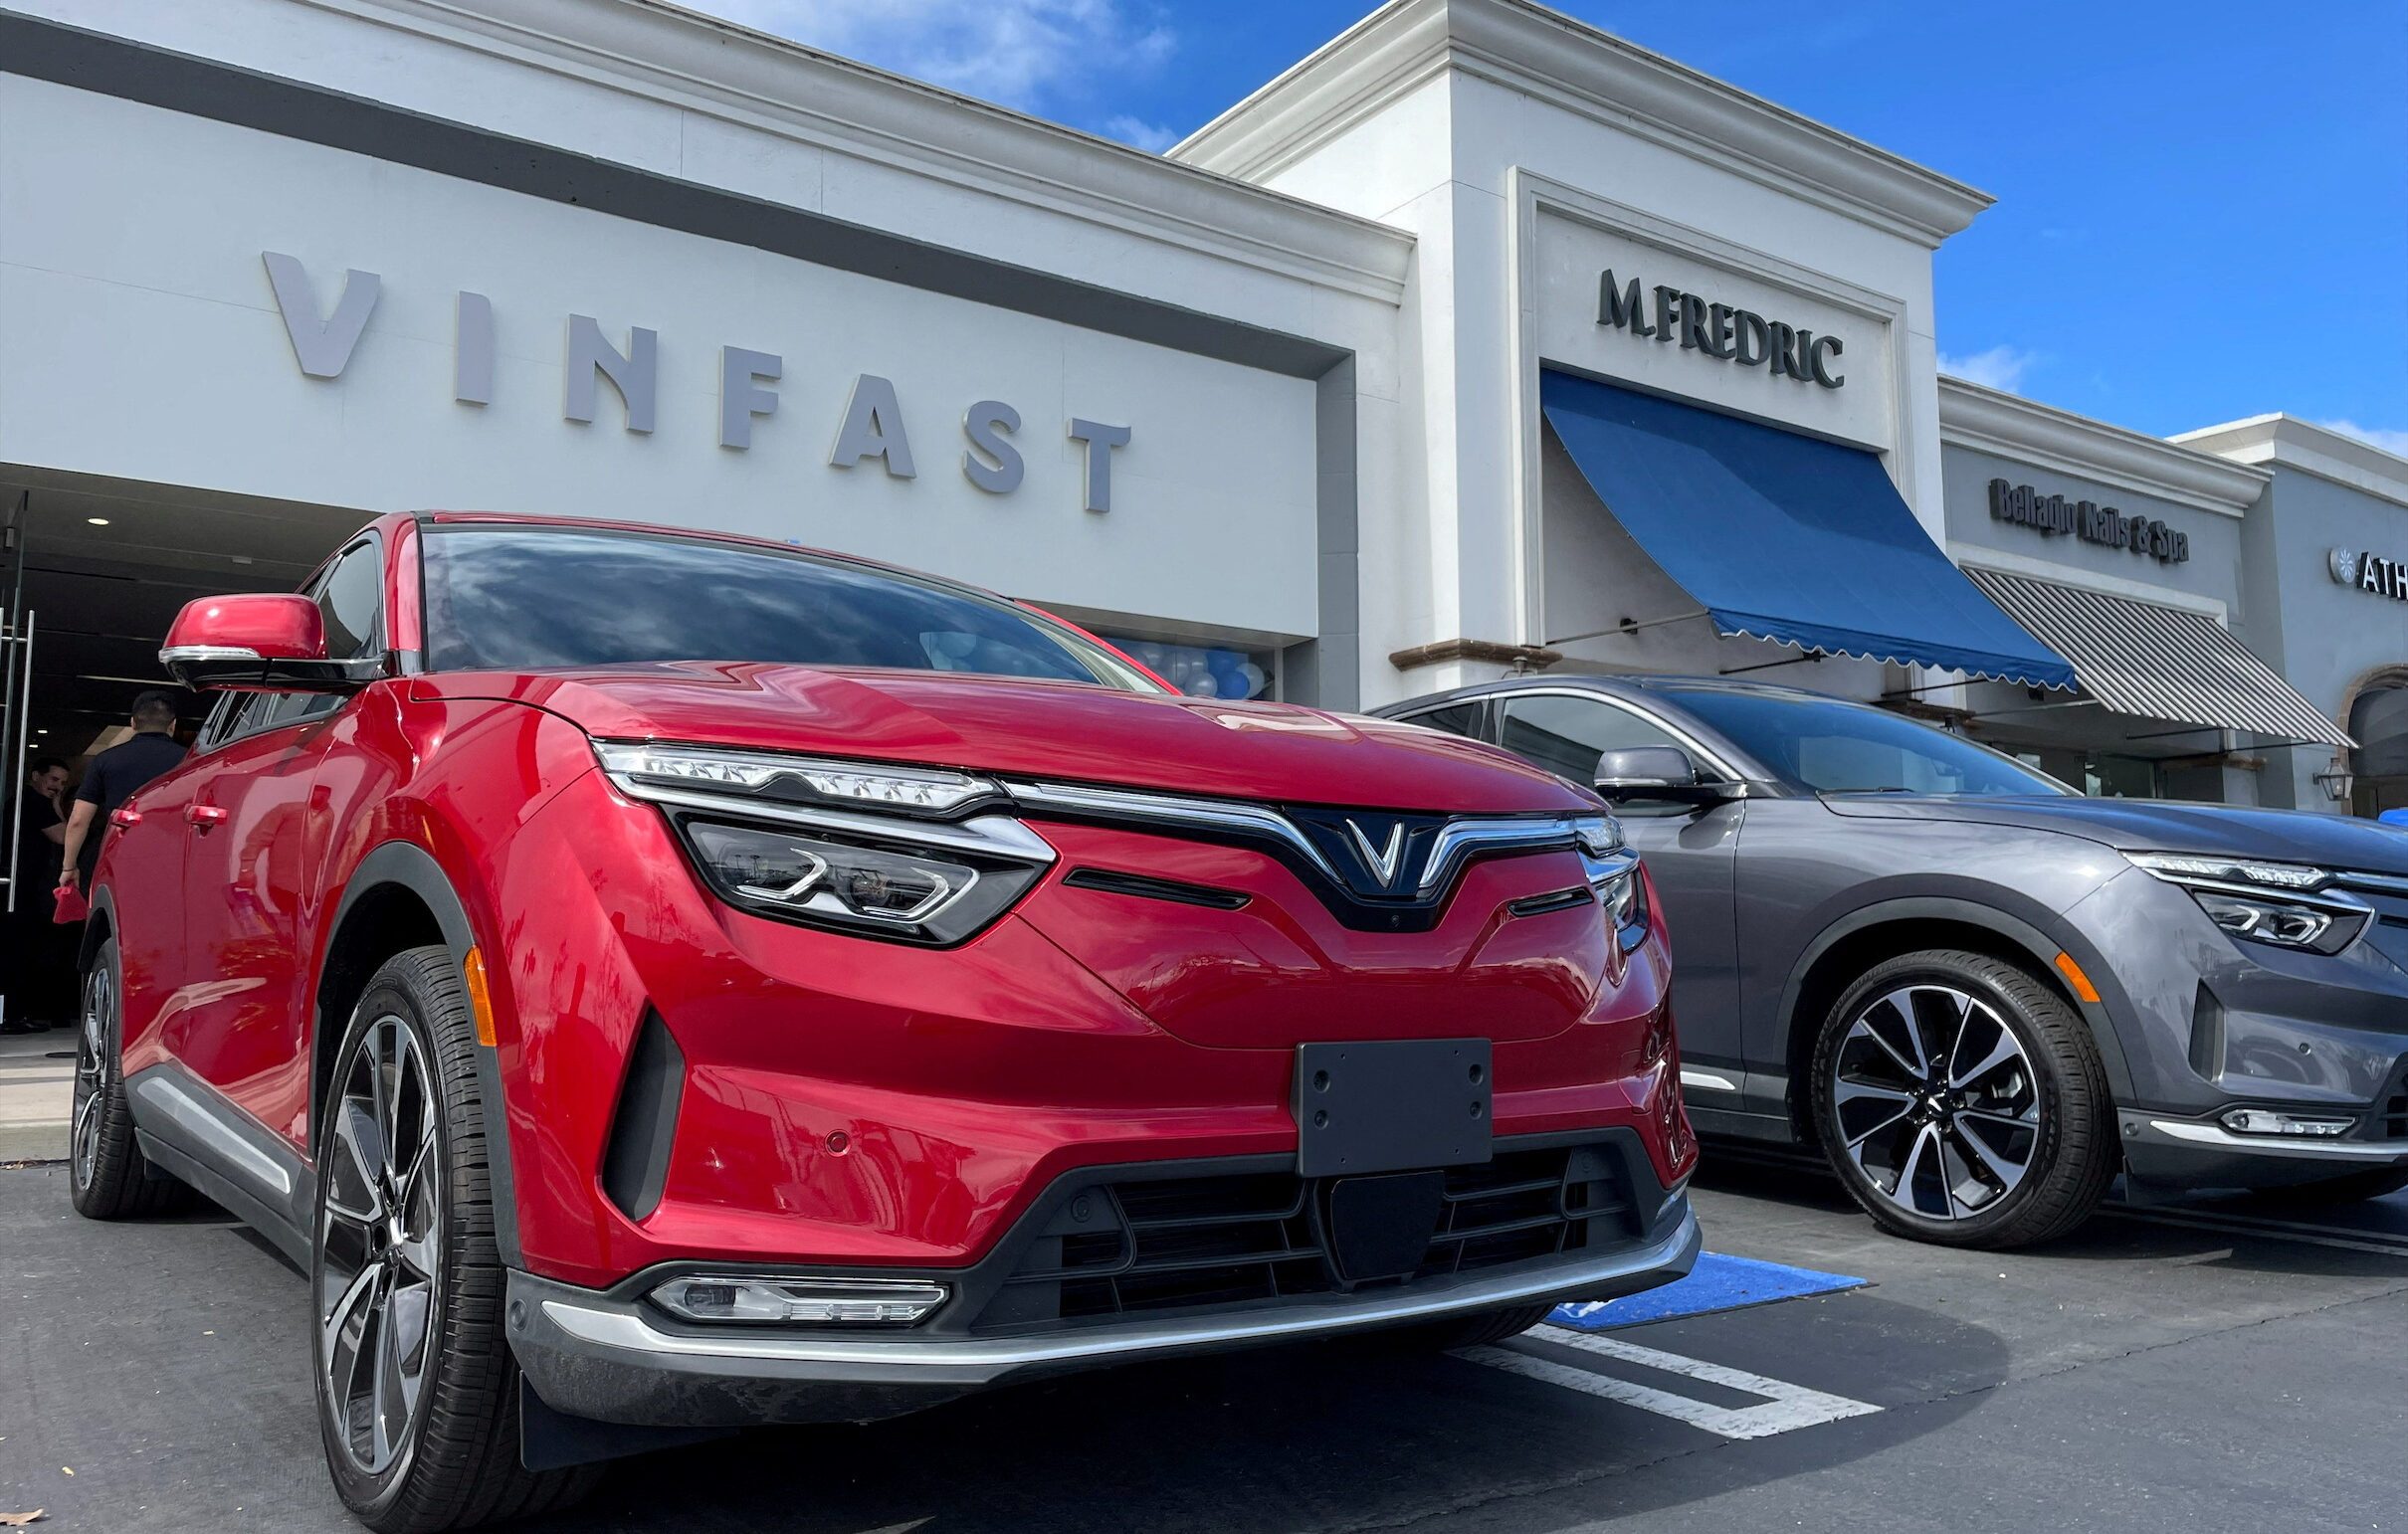 Vietnamese EV maker VinFast launches first dealership in the US